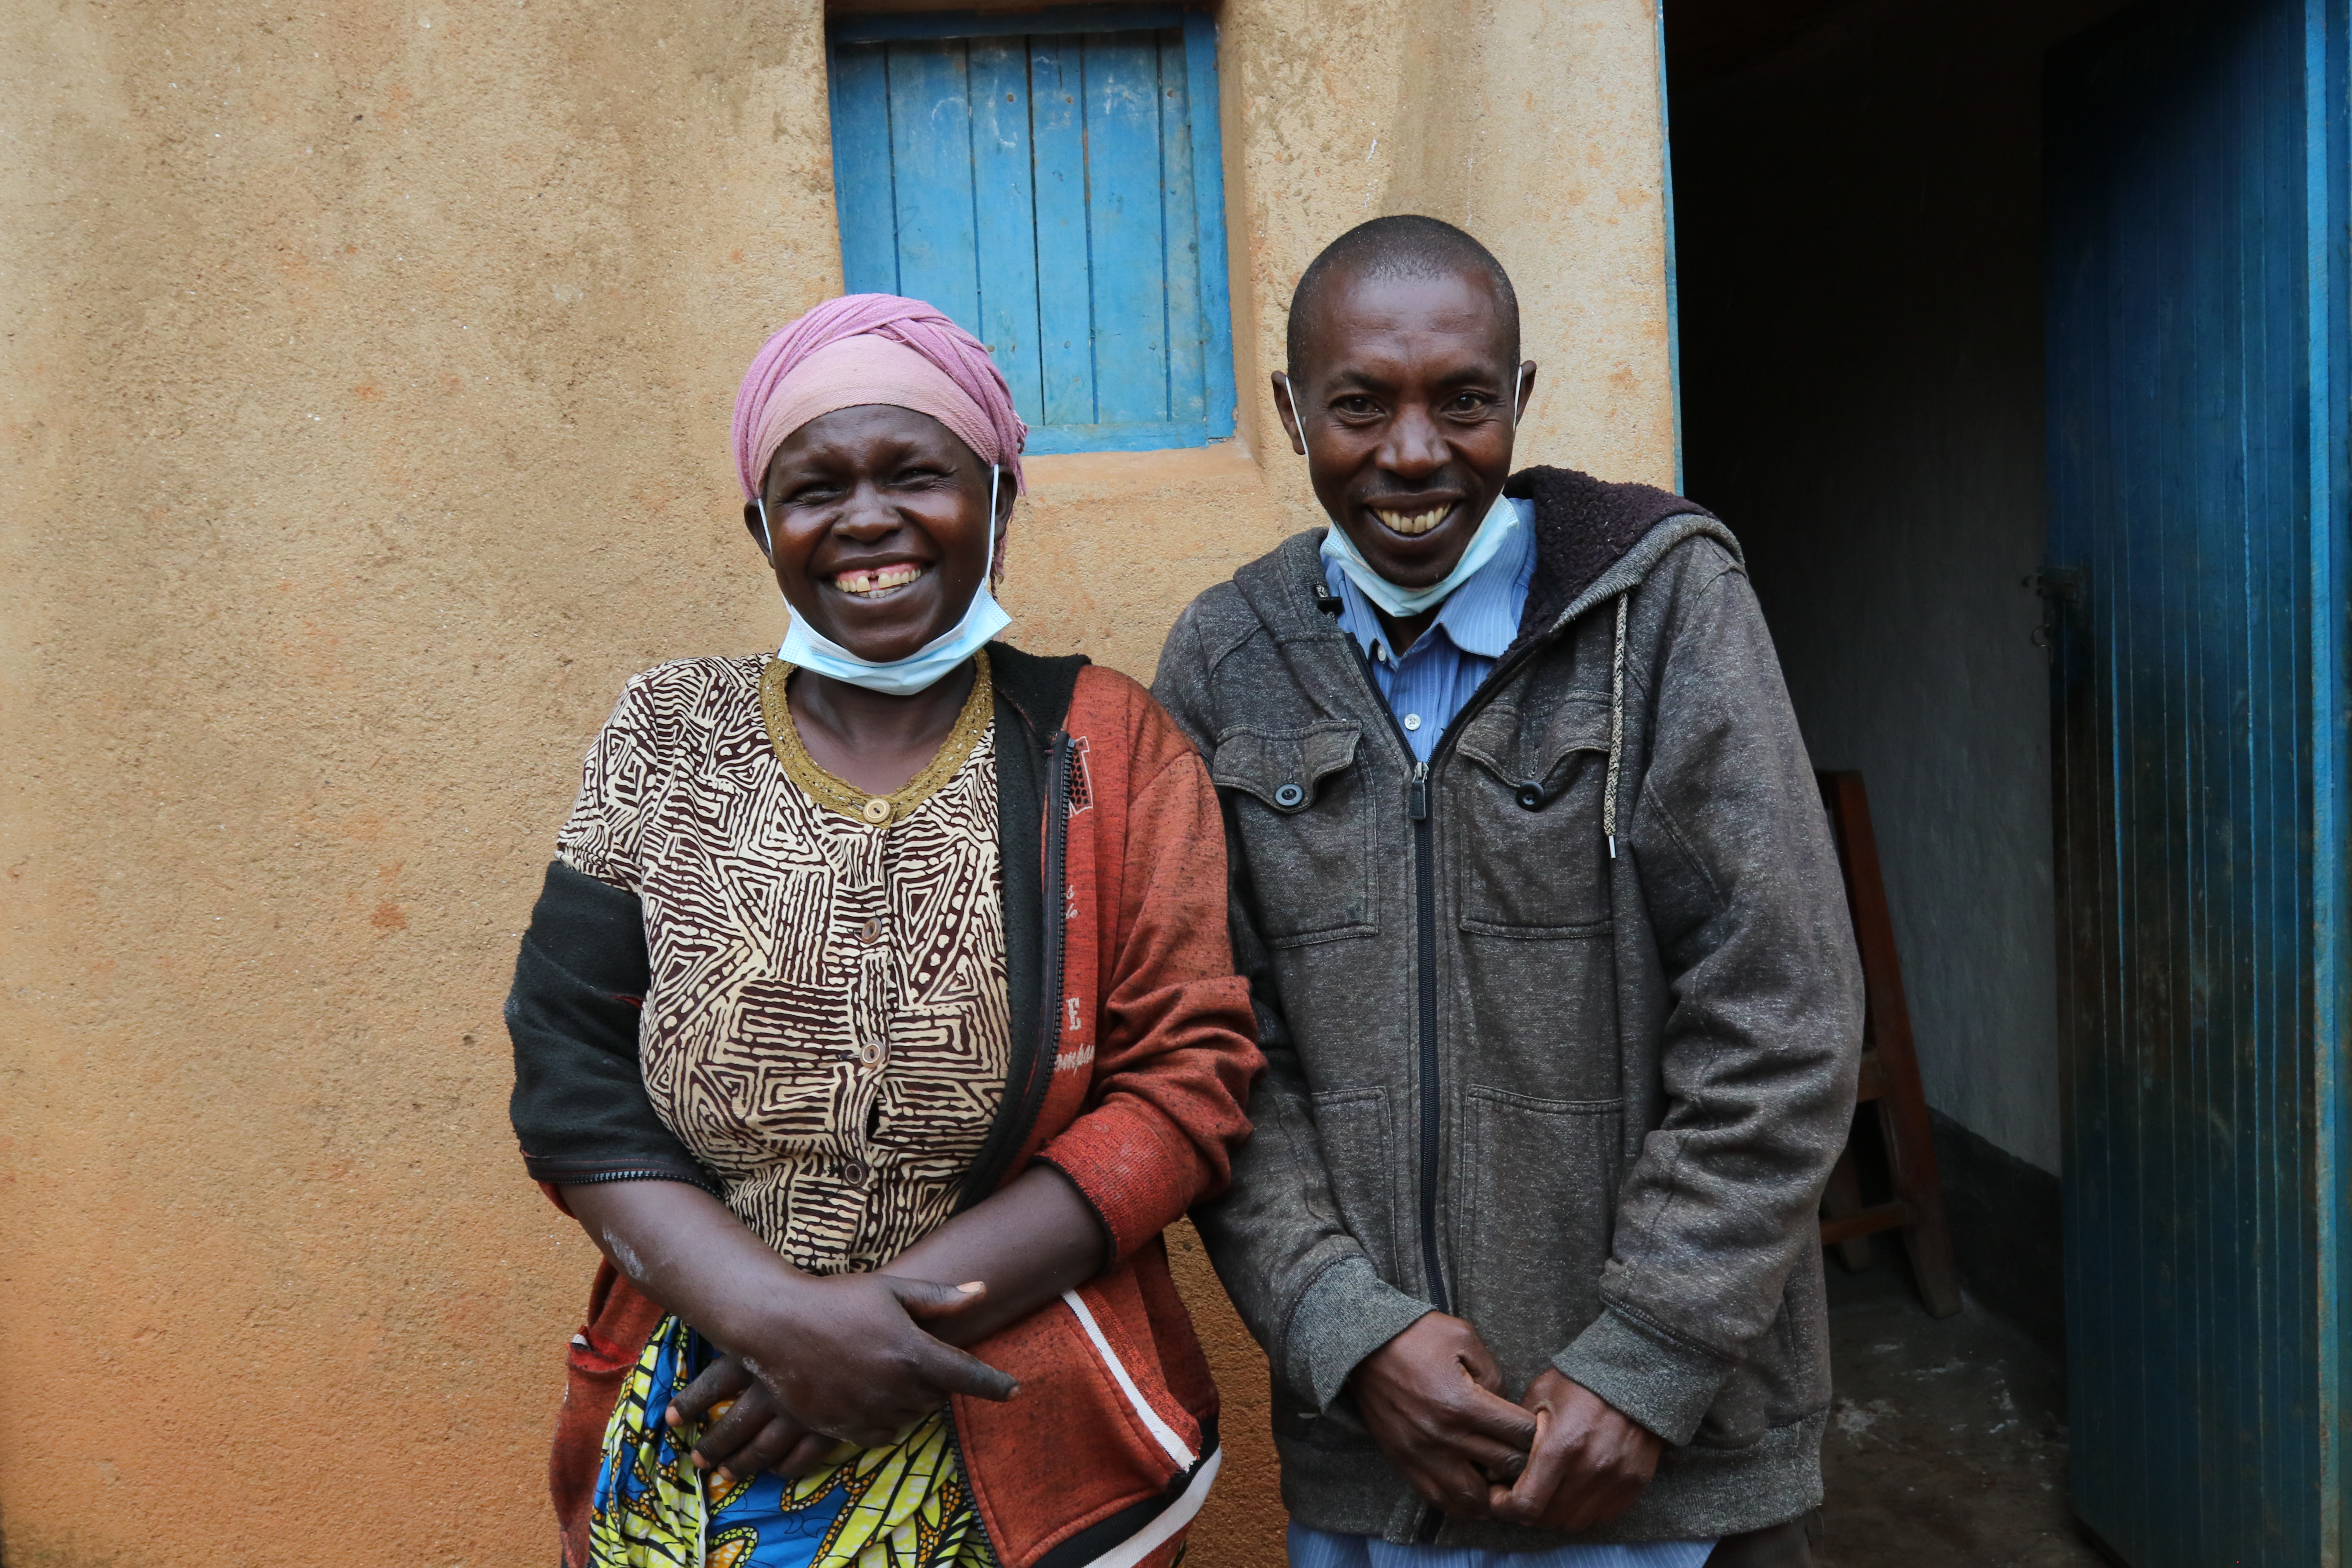 Antoinette and Vincente describe life in Rwanda during the COVID-19 pandemic. Photo: WFP/Emily Fredenberg